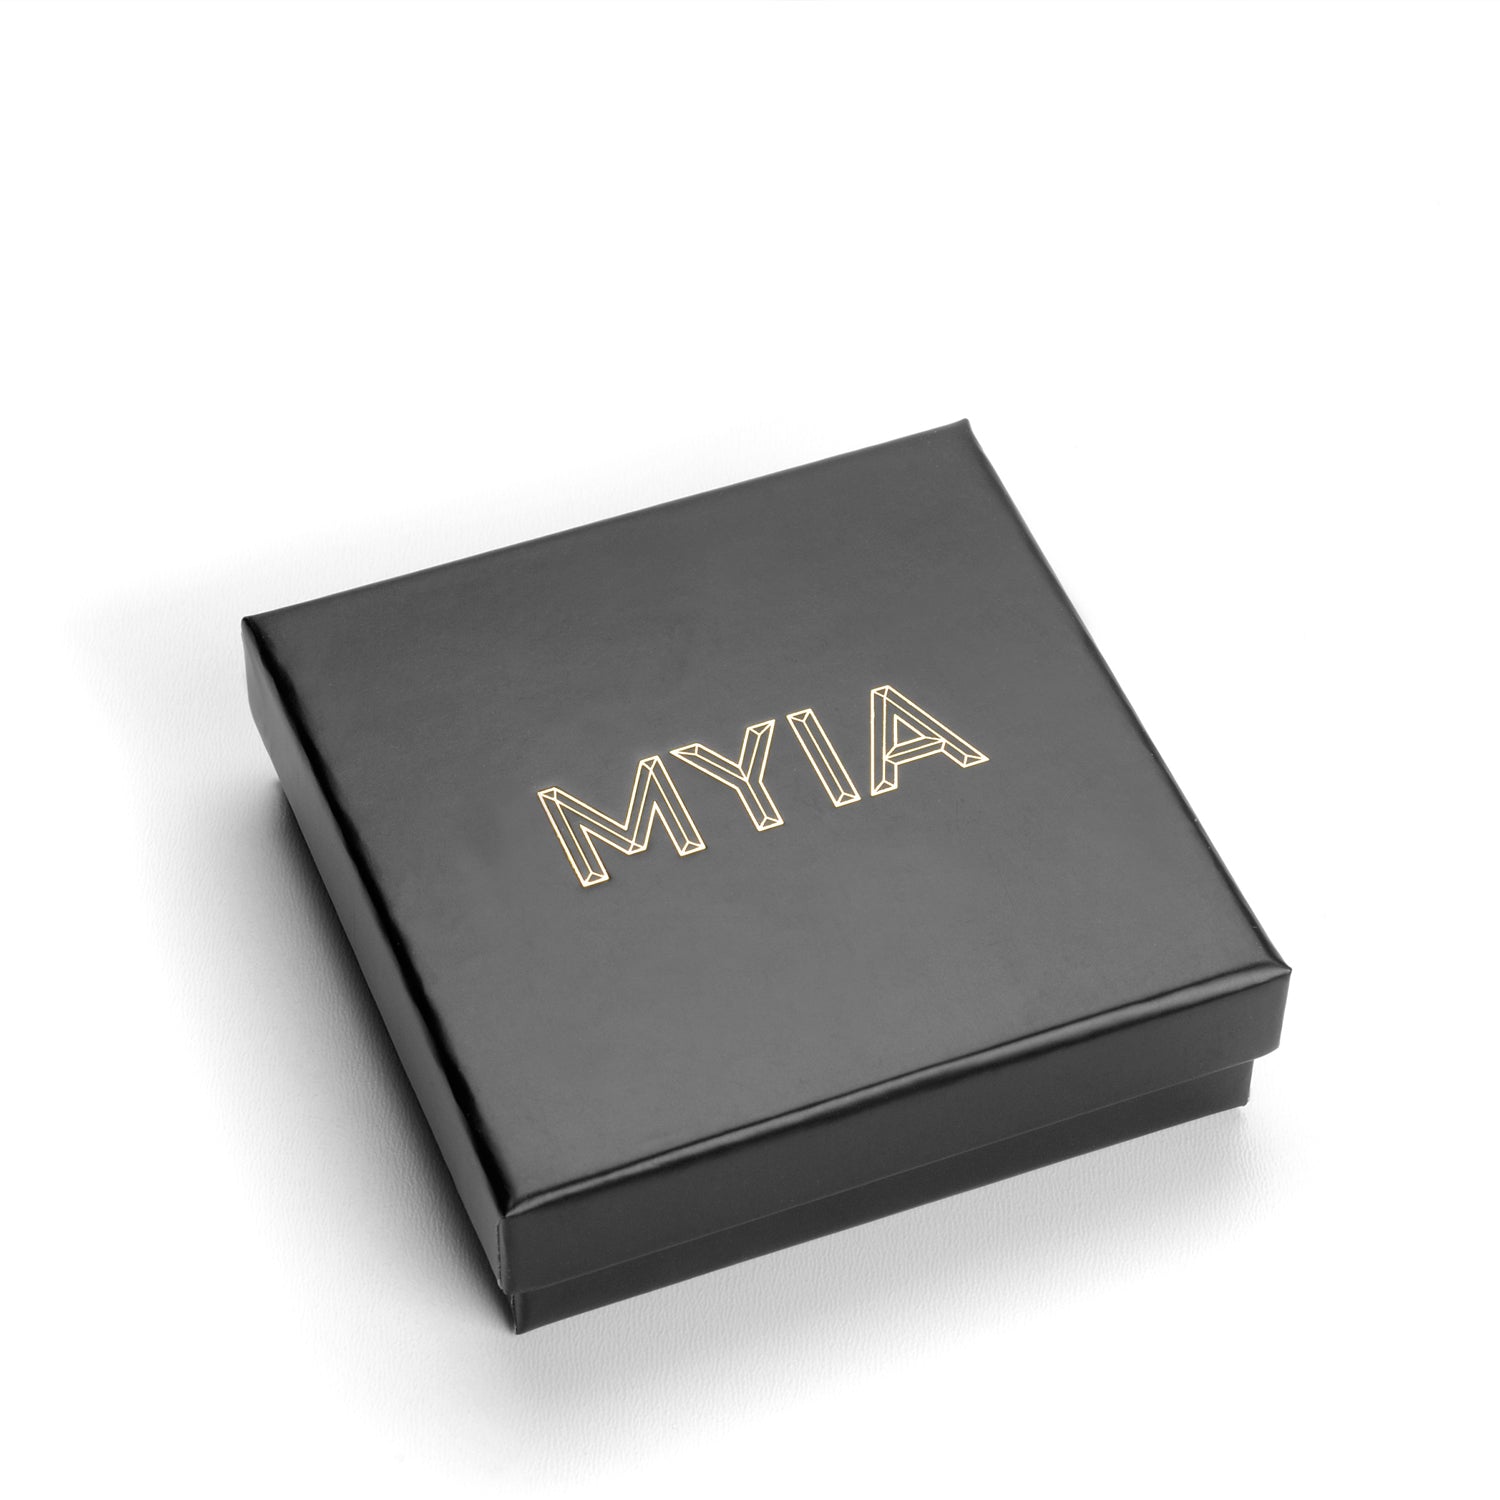 Two-tone Ultra Skinny Square Stacking Ring - 9k Rose Gold & Silver - Myia Bonner Jewellery